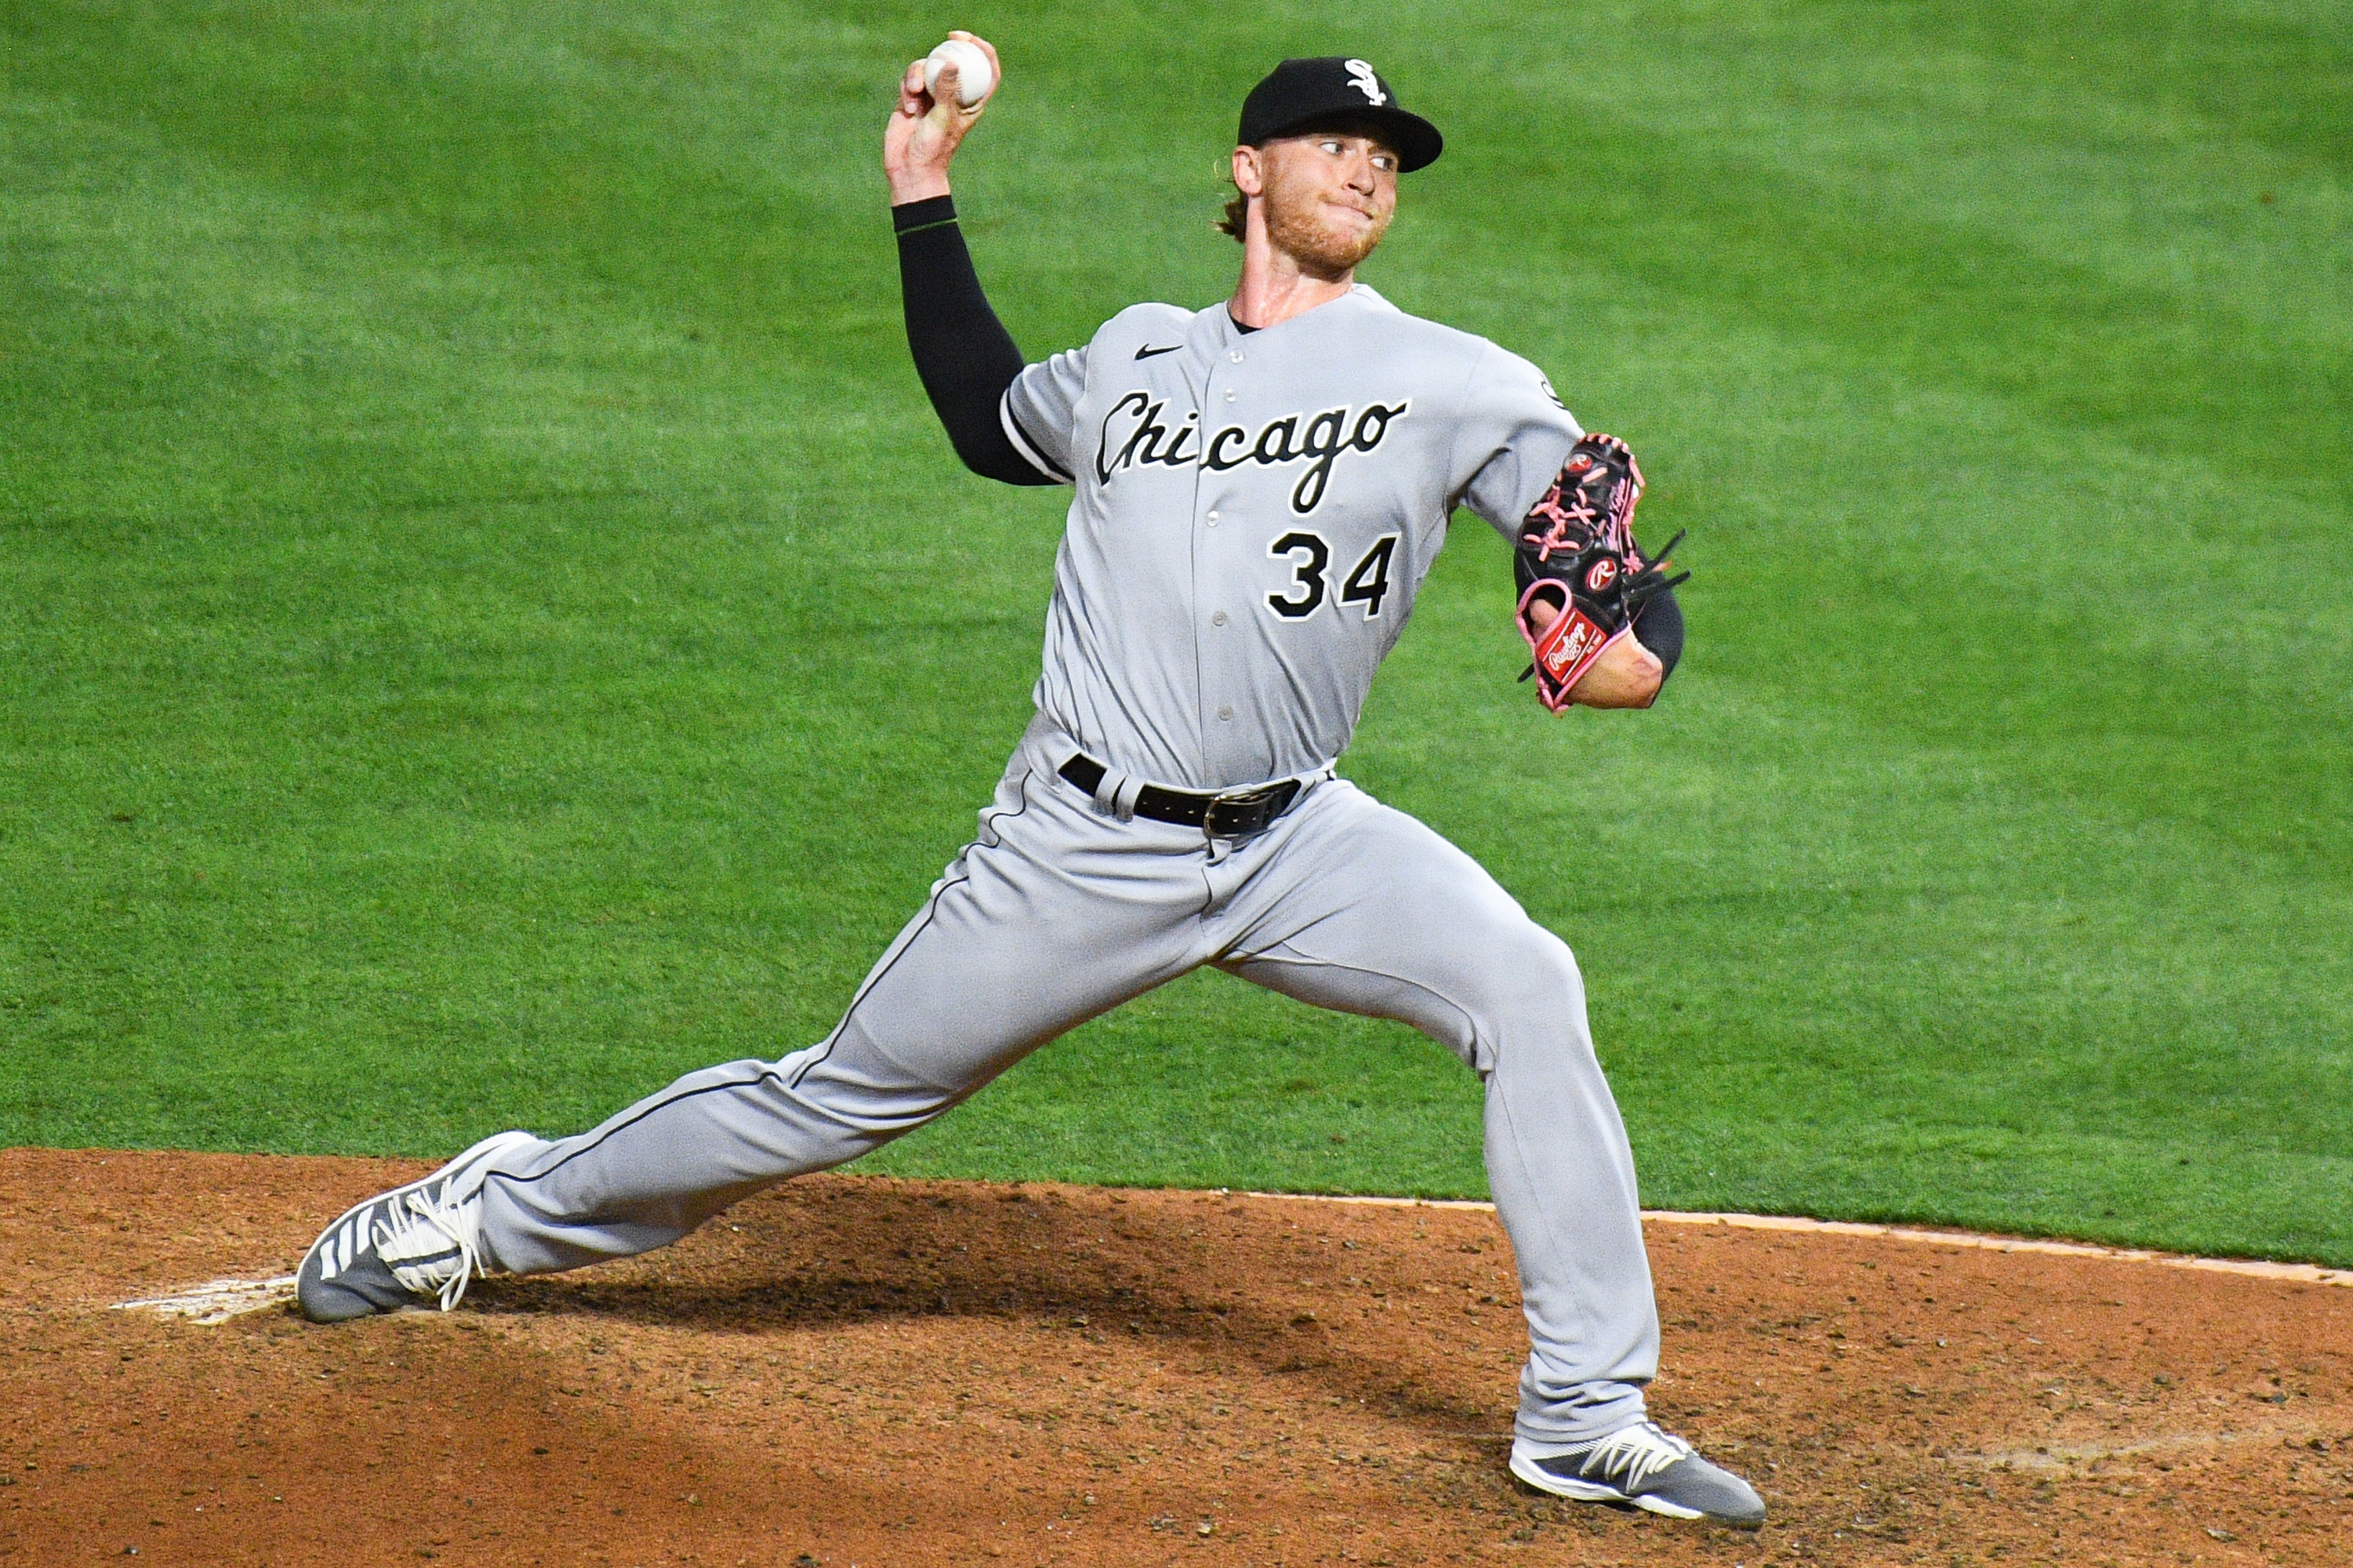 5 Things You Can Only Do at a Chicago White Sox Game